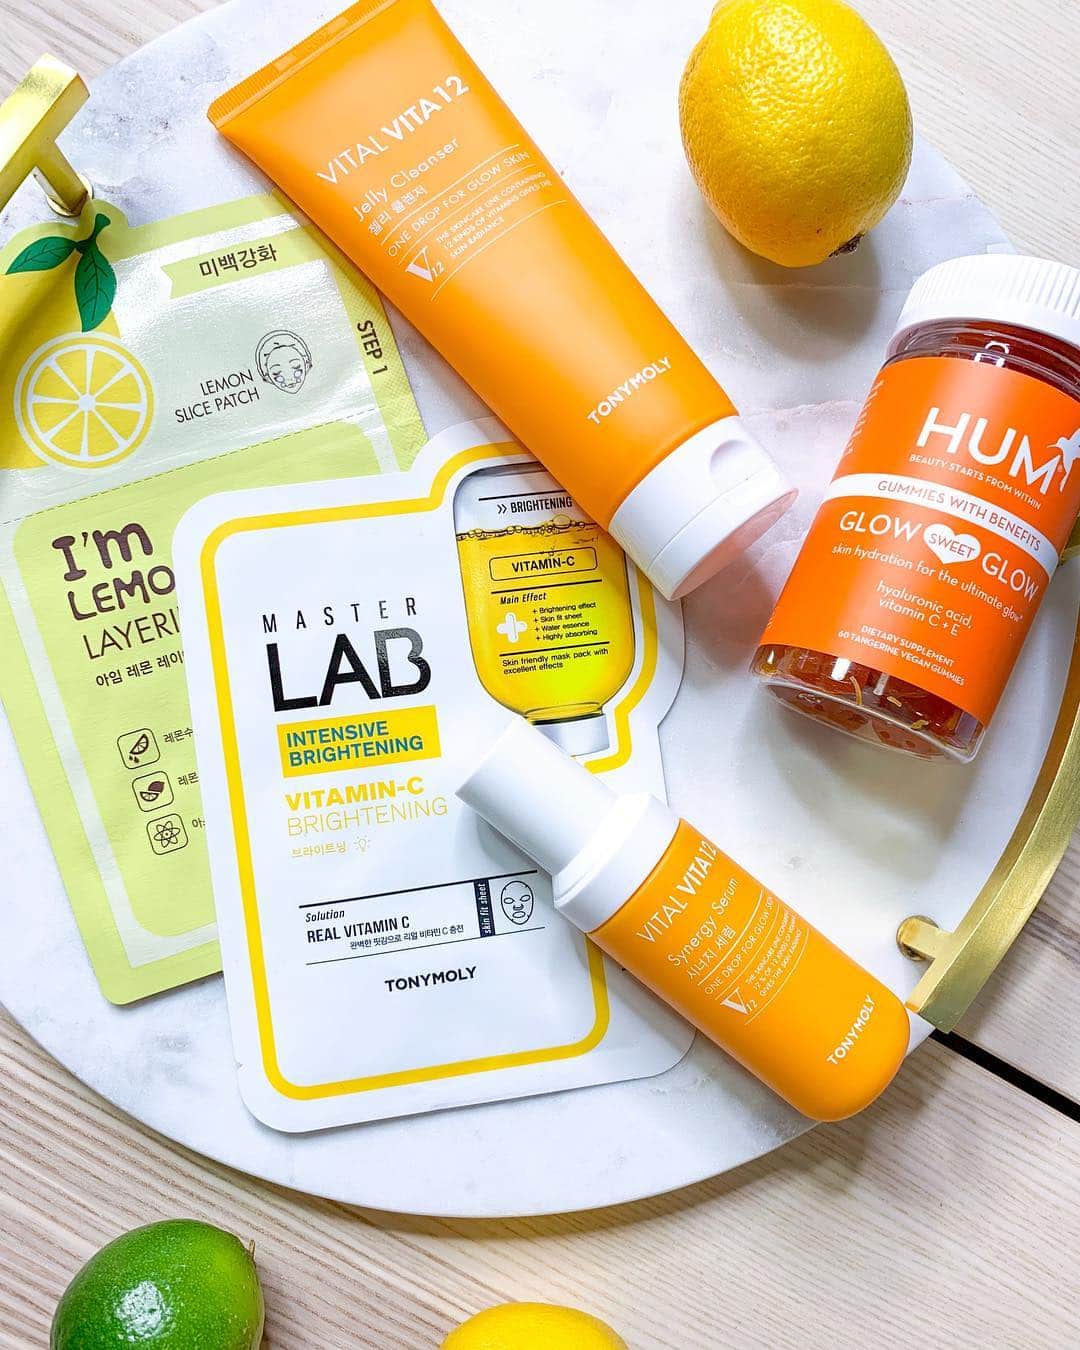 TONYMOLY USA Officialさんのインスタグラム写真 - (TONYMOLY USA OfficialInstagram)「***GIVEAWAY CLOSED It’s National Vitamin C Day! 🍋⚡️Did you know, Vitamin C is one of the most effective ingredients to fade dark spots and hyperpigmentation?! ⠀⠀⠀⠀⠀ ⠀⠀⠀⠀⠀⠀⠀⠀⠀ To celebrate one of our favorite ingredients, we are giving two lucky winners over $75 of Vitamin C rich products so you can get glowing and radiant skin! ⠀⠀⠀⠀⠀⠀⠀⠀⠀ Includes: ⠀⠀⠀⠀⠀⠀⠀⠀⠀ -Vital Vita 12 Jelly Cleanser ⠀⠀⠀⠀⠀⠀⠀⠀⠀ -Vital Vita 12 Synergy Serum ⠀⠀⠀⠀⠀⠀⠀⠀⠀ -I’m Lemon Layering Sheet Mask ⠀⠀⠀⠀⠀⠀⠀⠀⠀ -Master Lab Vitamin C Sheet Mask ⠀⠀⠀⠀⠀⠀⠀⠀⠀ -Glow Sweet Glow Gummies from our friends at @humnutrition ⠀⠀⠀⠀⠀⠀⠀⠀⠀ ⠀⠀⠀⠀⠀⠀⠀⠀⠀ To Enter: ⠀⠀⠀⠀⠀⠀⠀⠀⠀ -Follow @tonymoly.us_official ⠀⠀⠀⠀ -Like this post ⠀⠀⠀⠀⠀⠀⠀⠀⠀ -Tag a bestie ⠀⠀⠀⠀⠀⠀⠀⠀⠀ ⠀⠀⠀⠀⠀⠀⠀⠀⠀ Giveaway closes at 4/4/19 11:59 PM EST. Open to US residents only. #nationalvitamincday #TONYMOLYnMe #xoxoTM」4月5日 0時26分 - tonymoly.us_official